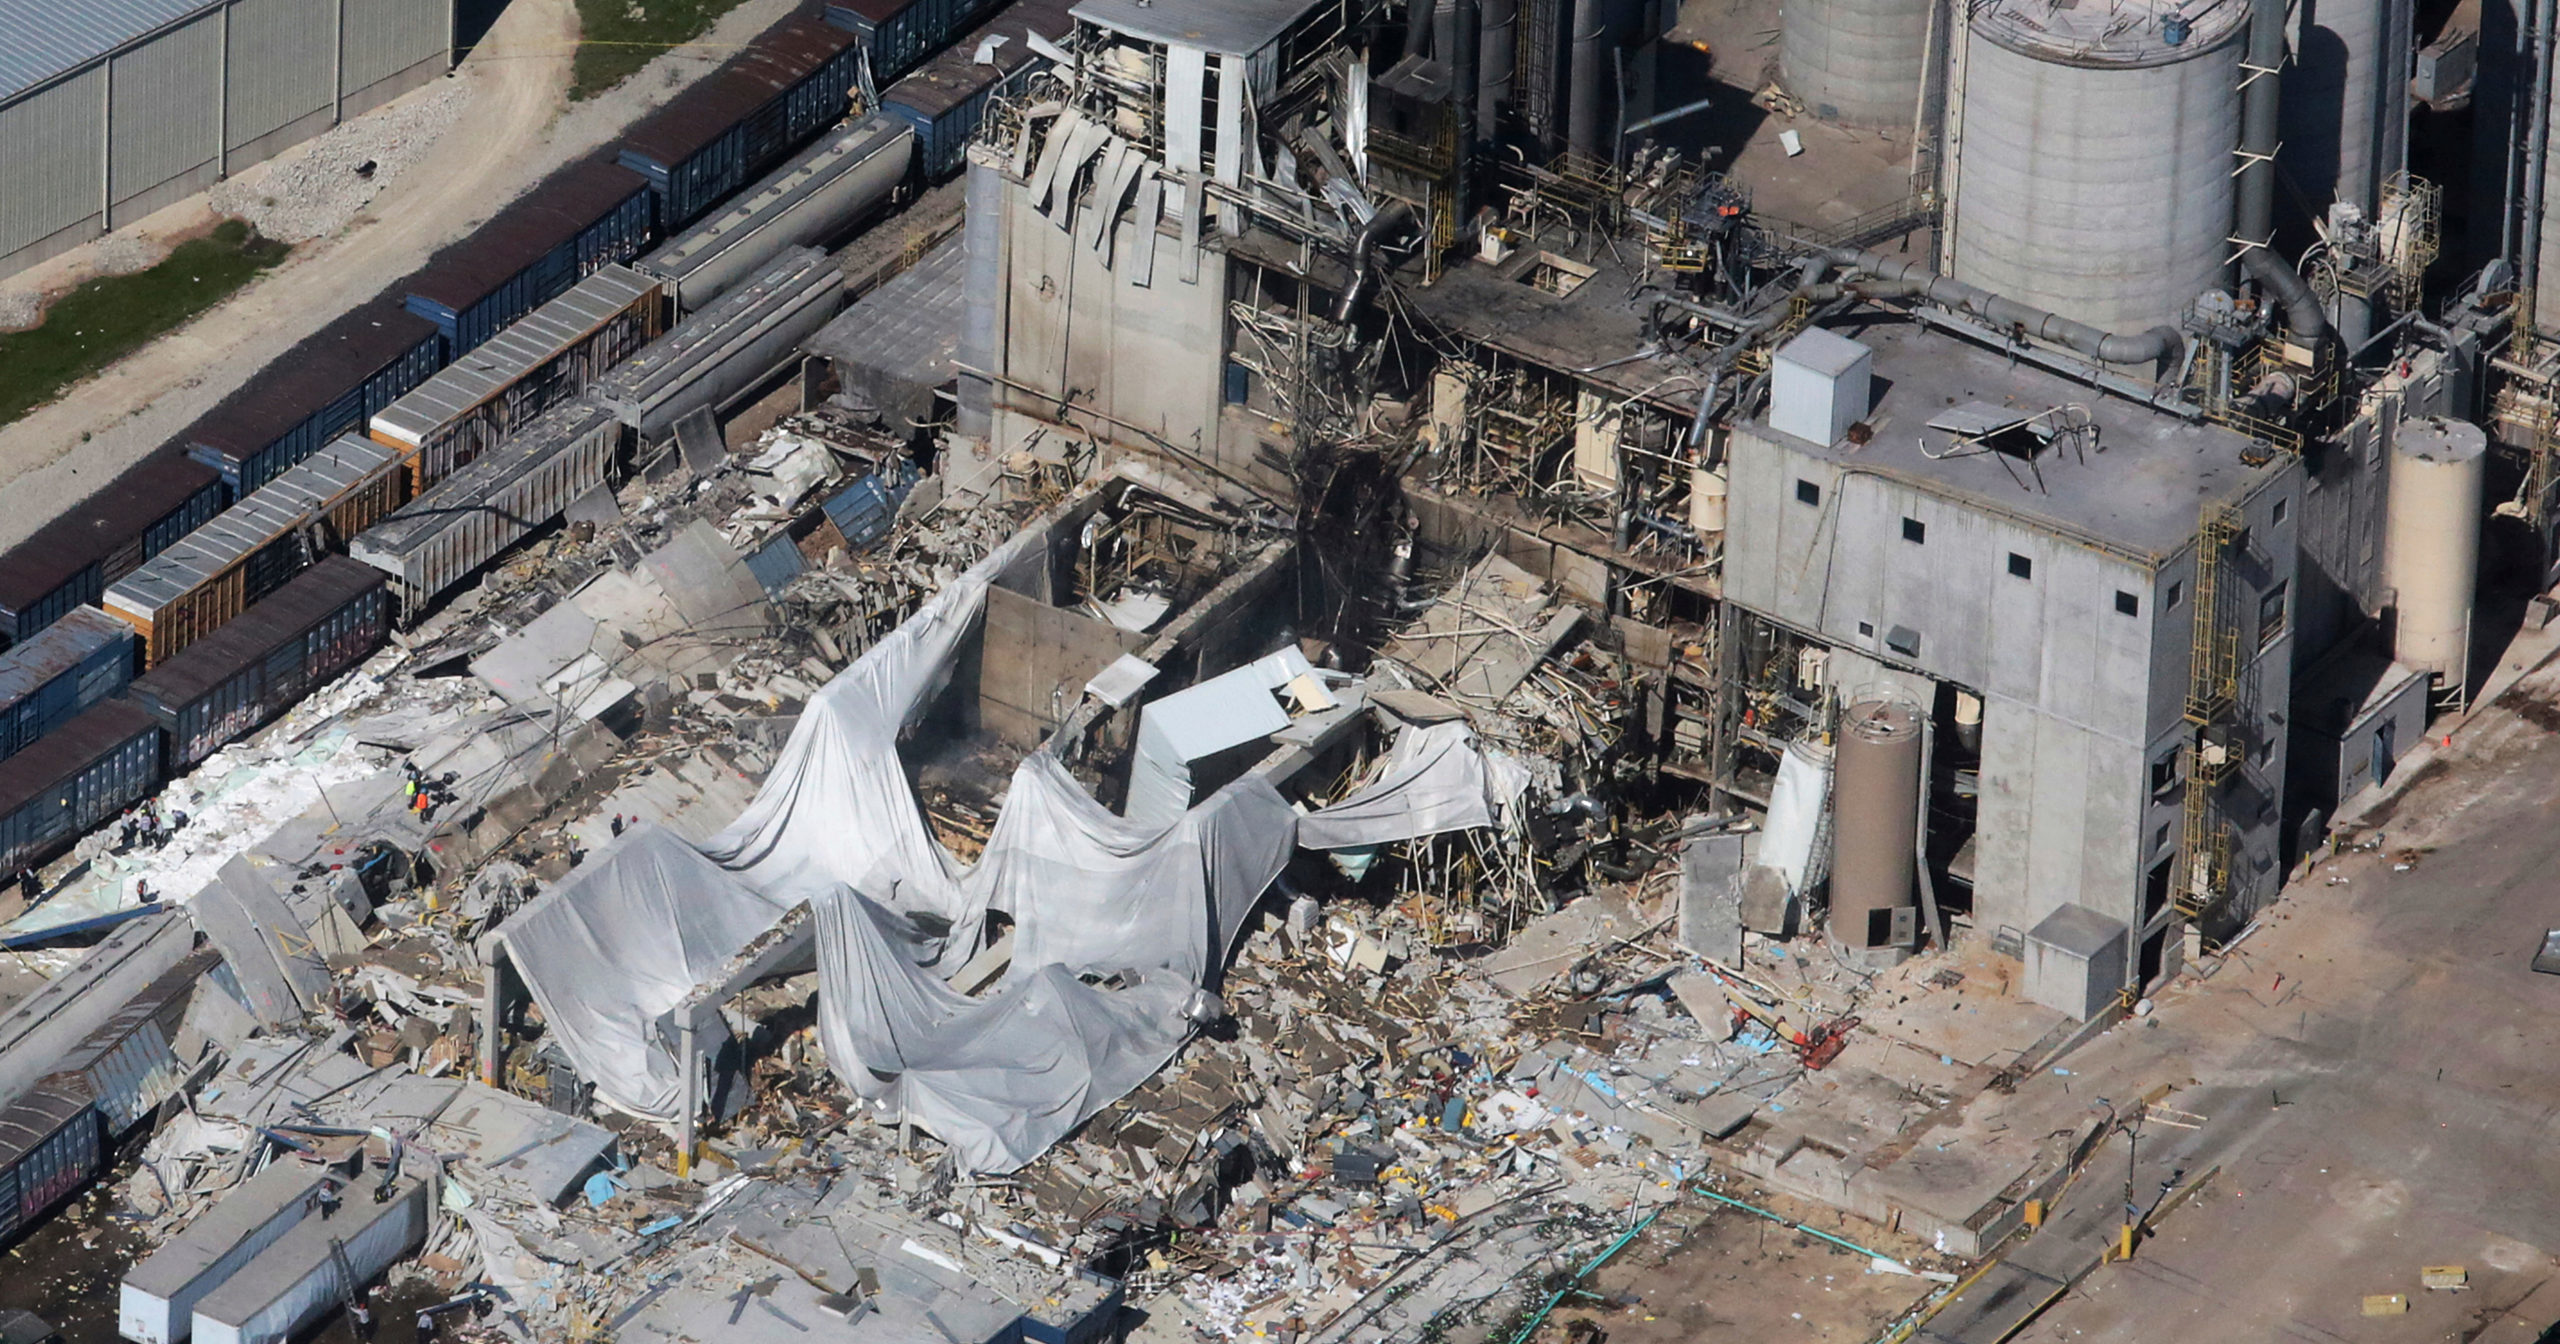 Part of the Didion Milling Plant in Cambria, Wisconsin, lies in ruins the day after an explosion on May 31, 2017.